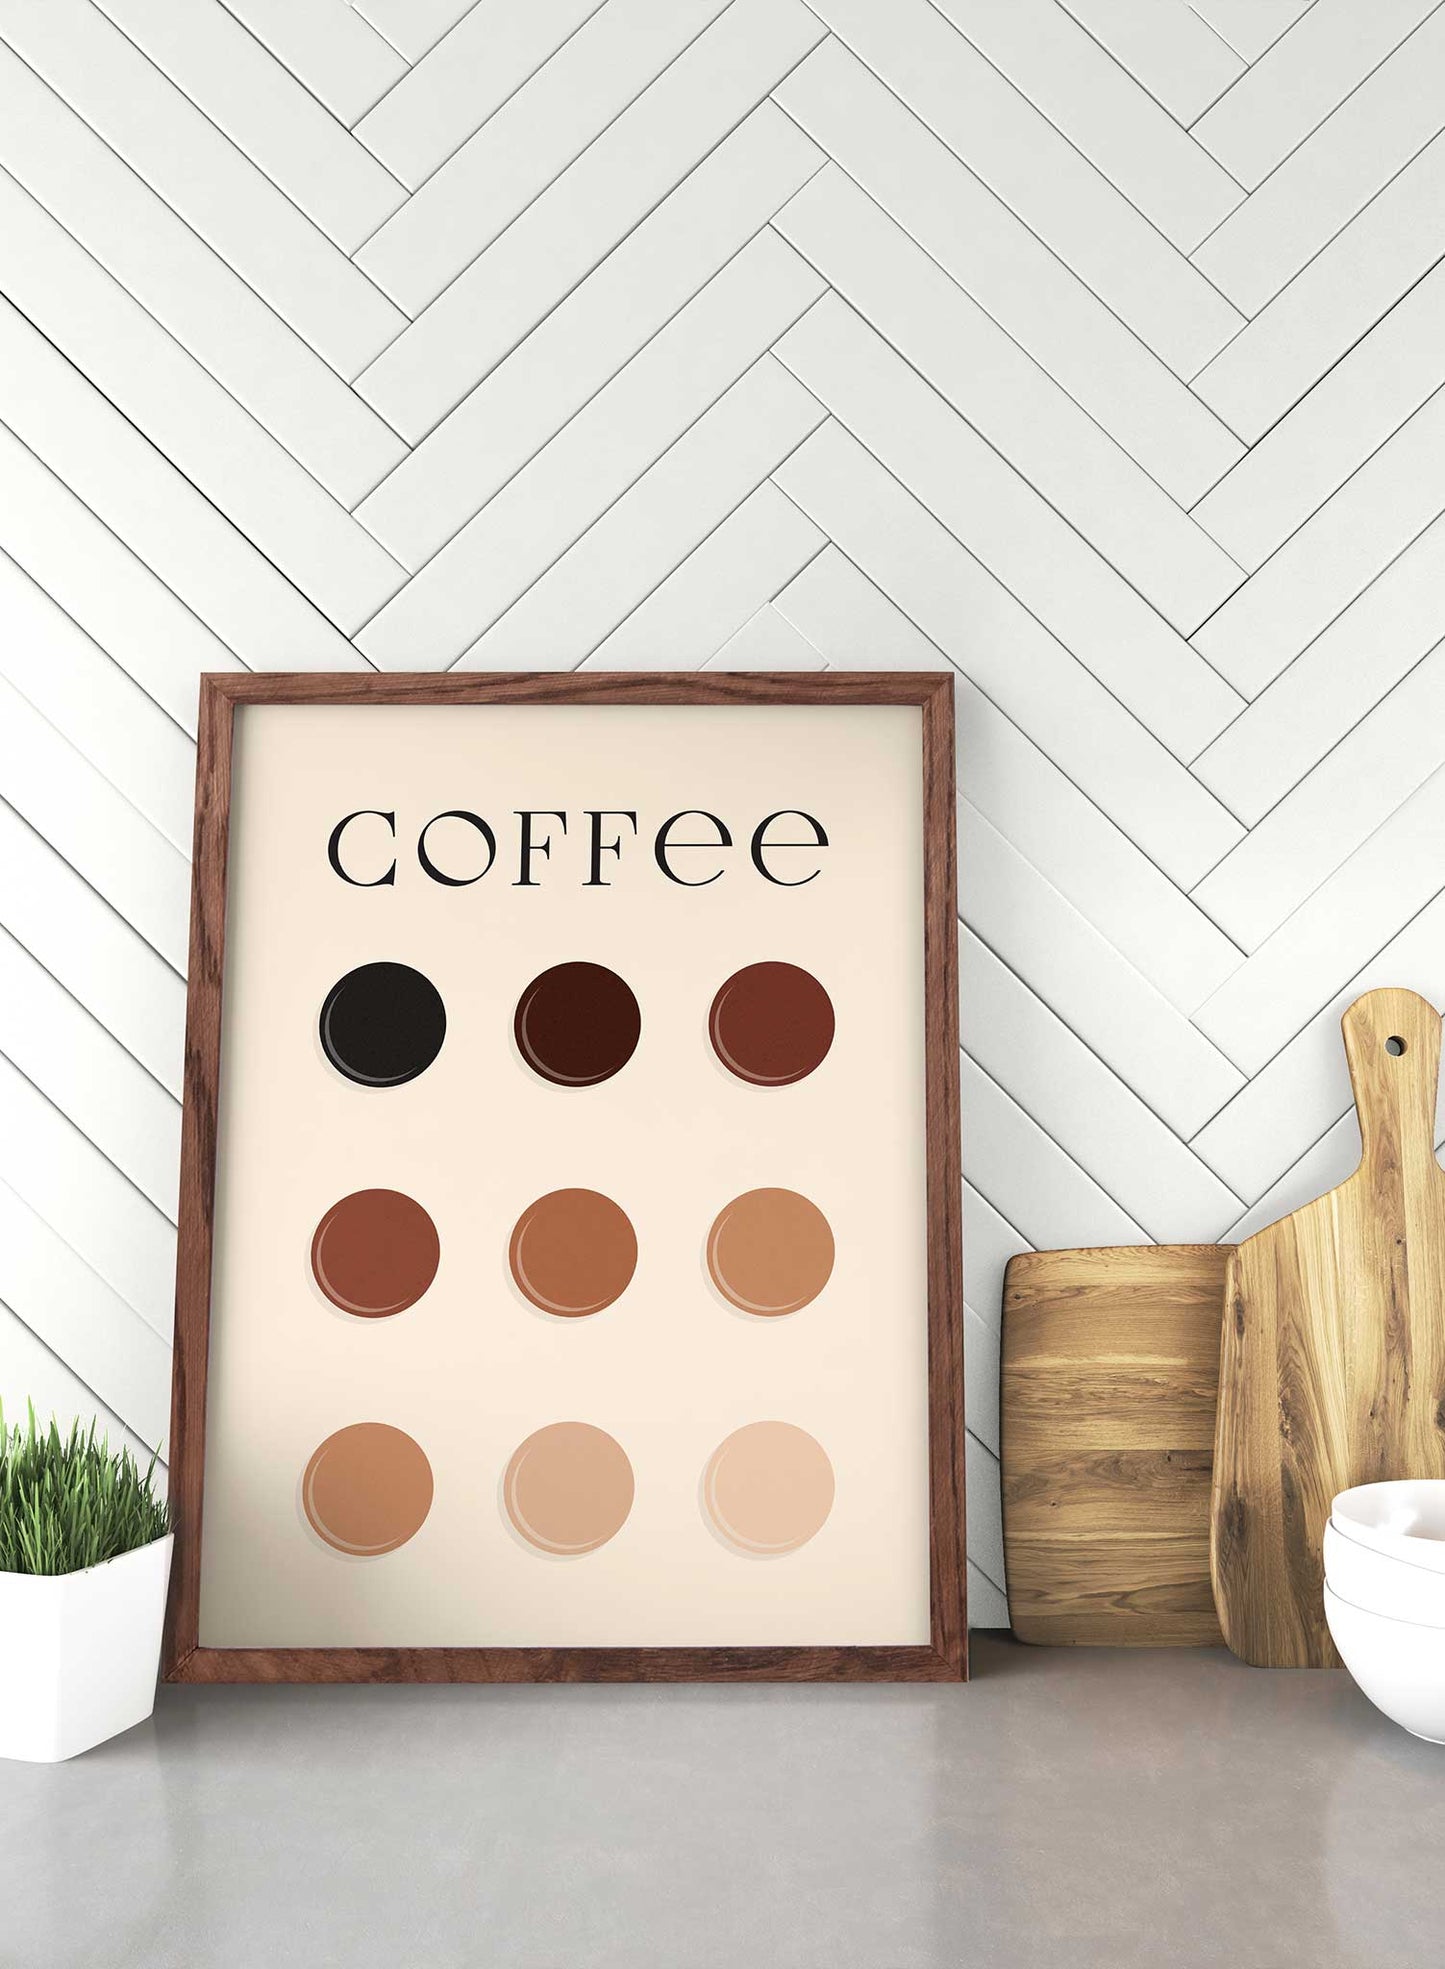 Coffee Gradient is a coffee themed illustration poster by Opposite Wall.